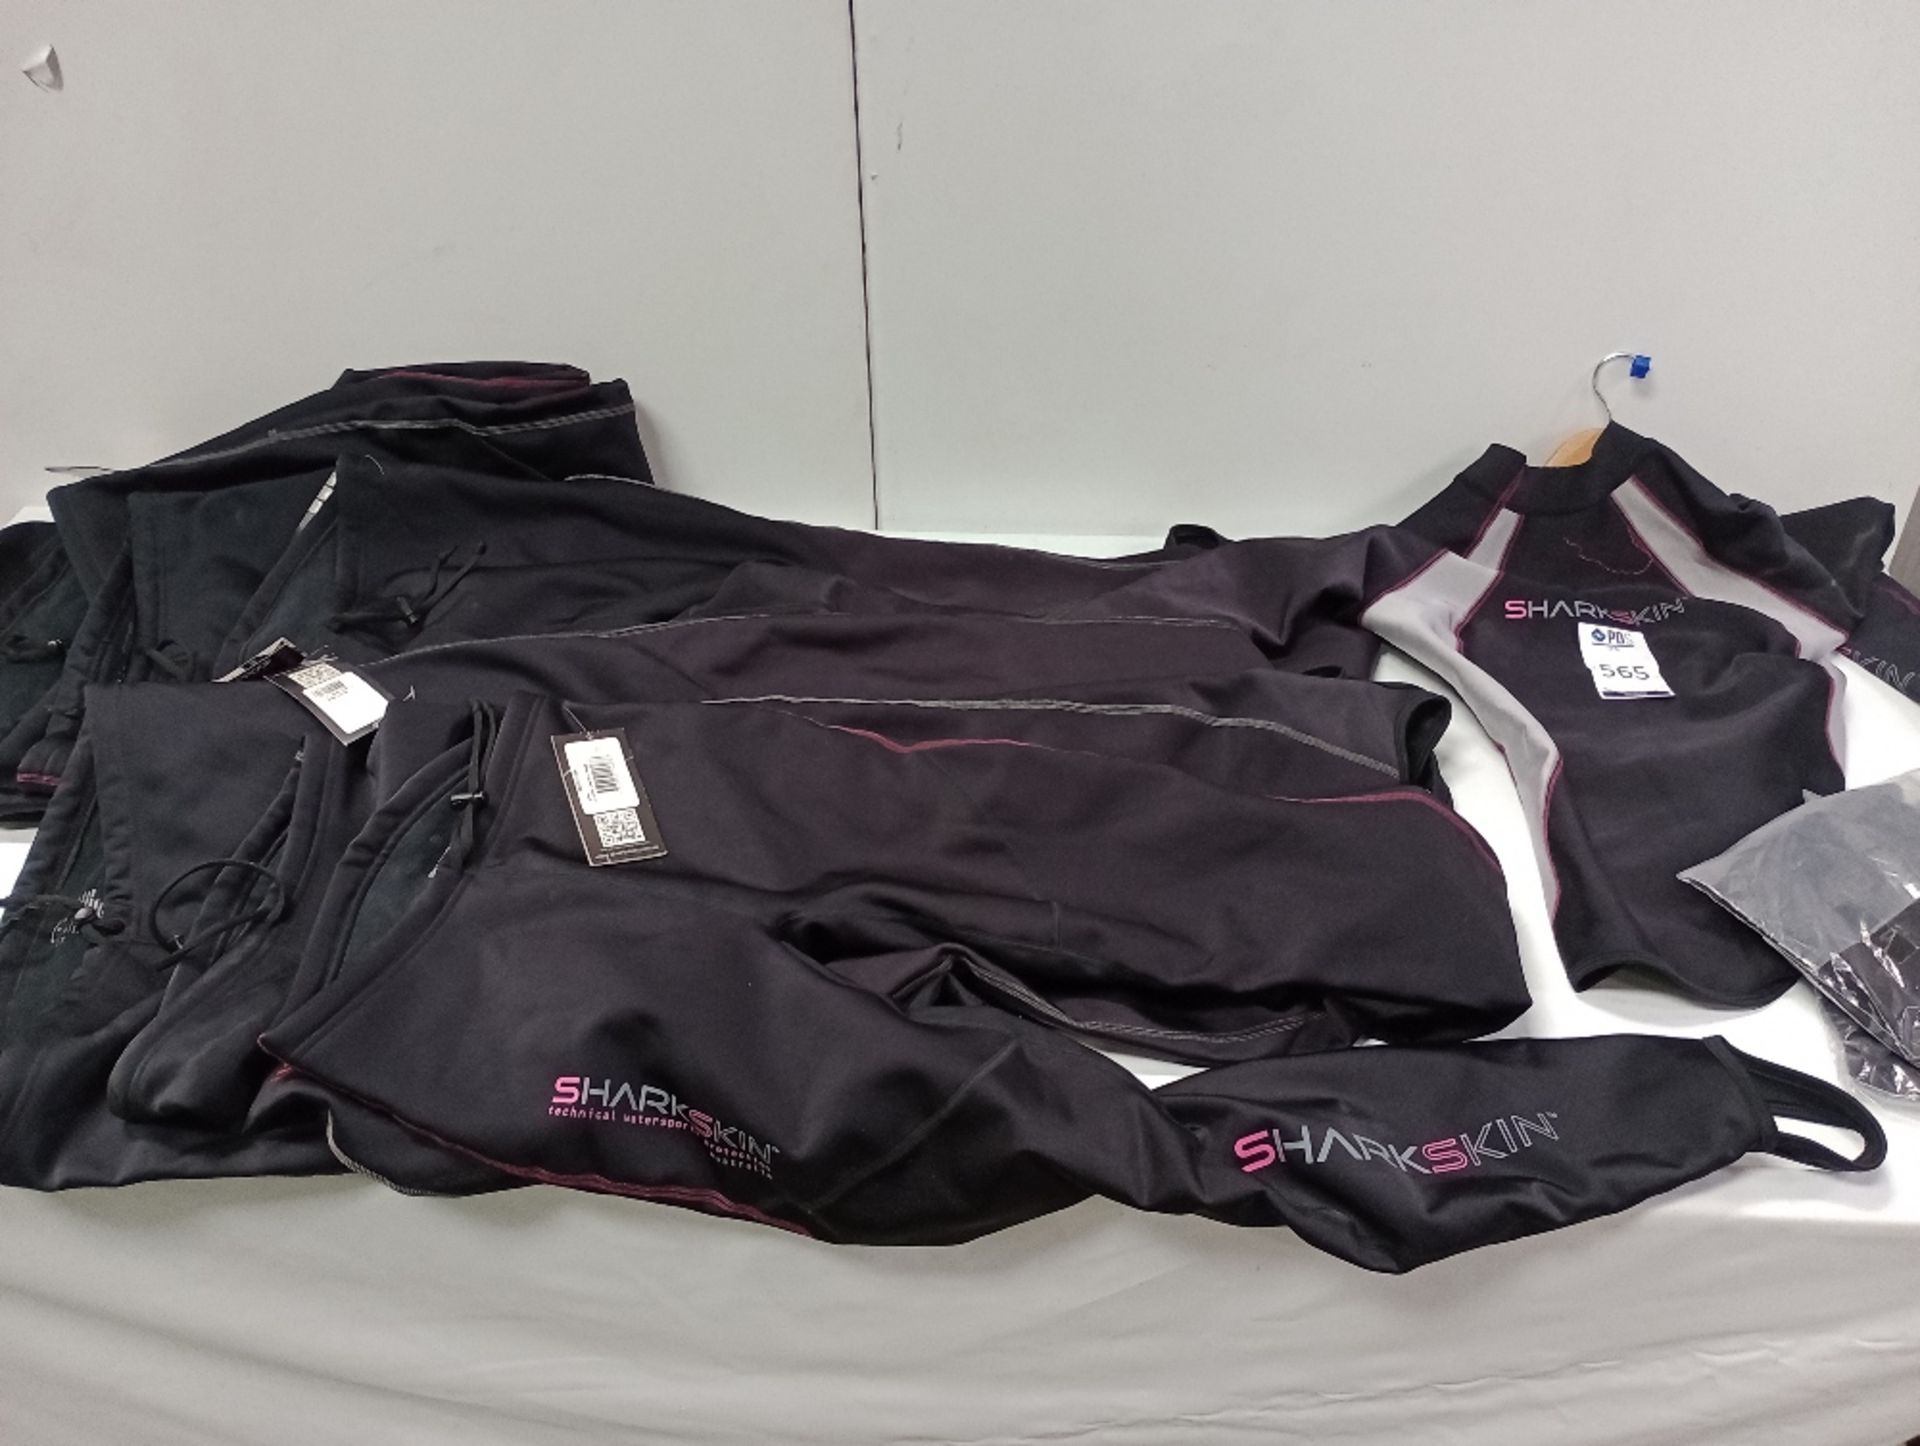 Various Sharkskin Technical Watersports Protection Chillproof Apparel (Location: Brentwood. Please